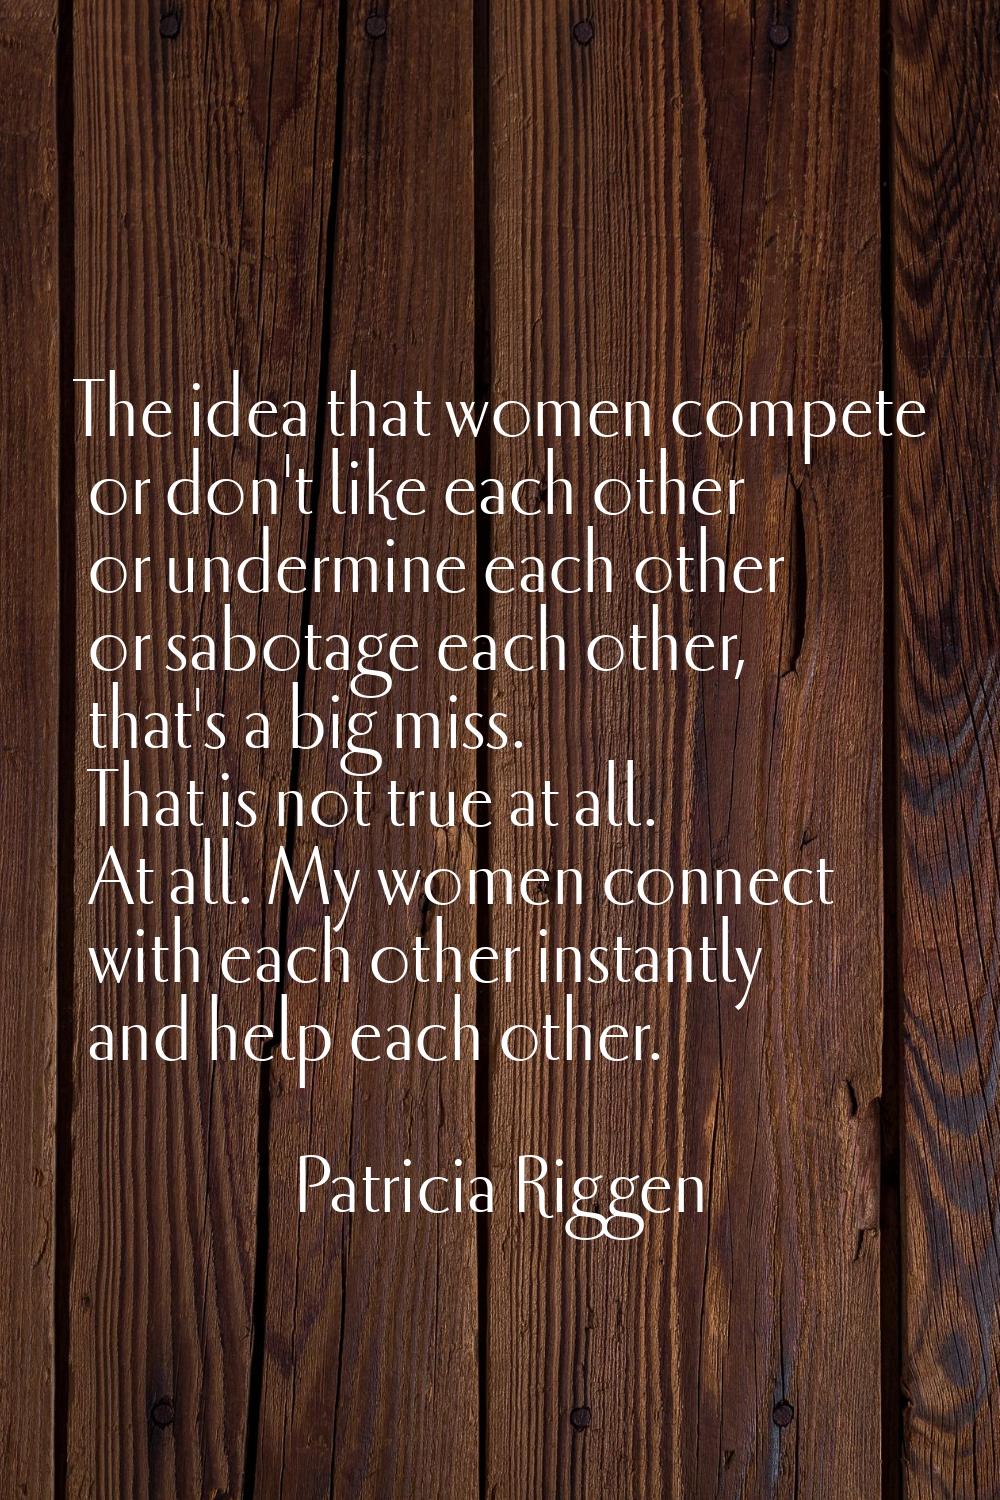 The idea that women compete or don't like each other or undermine each other or sabotage each other